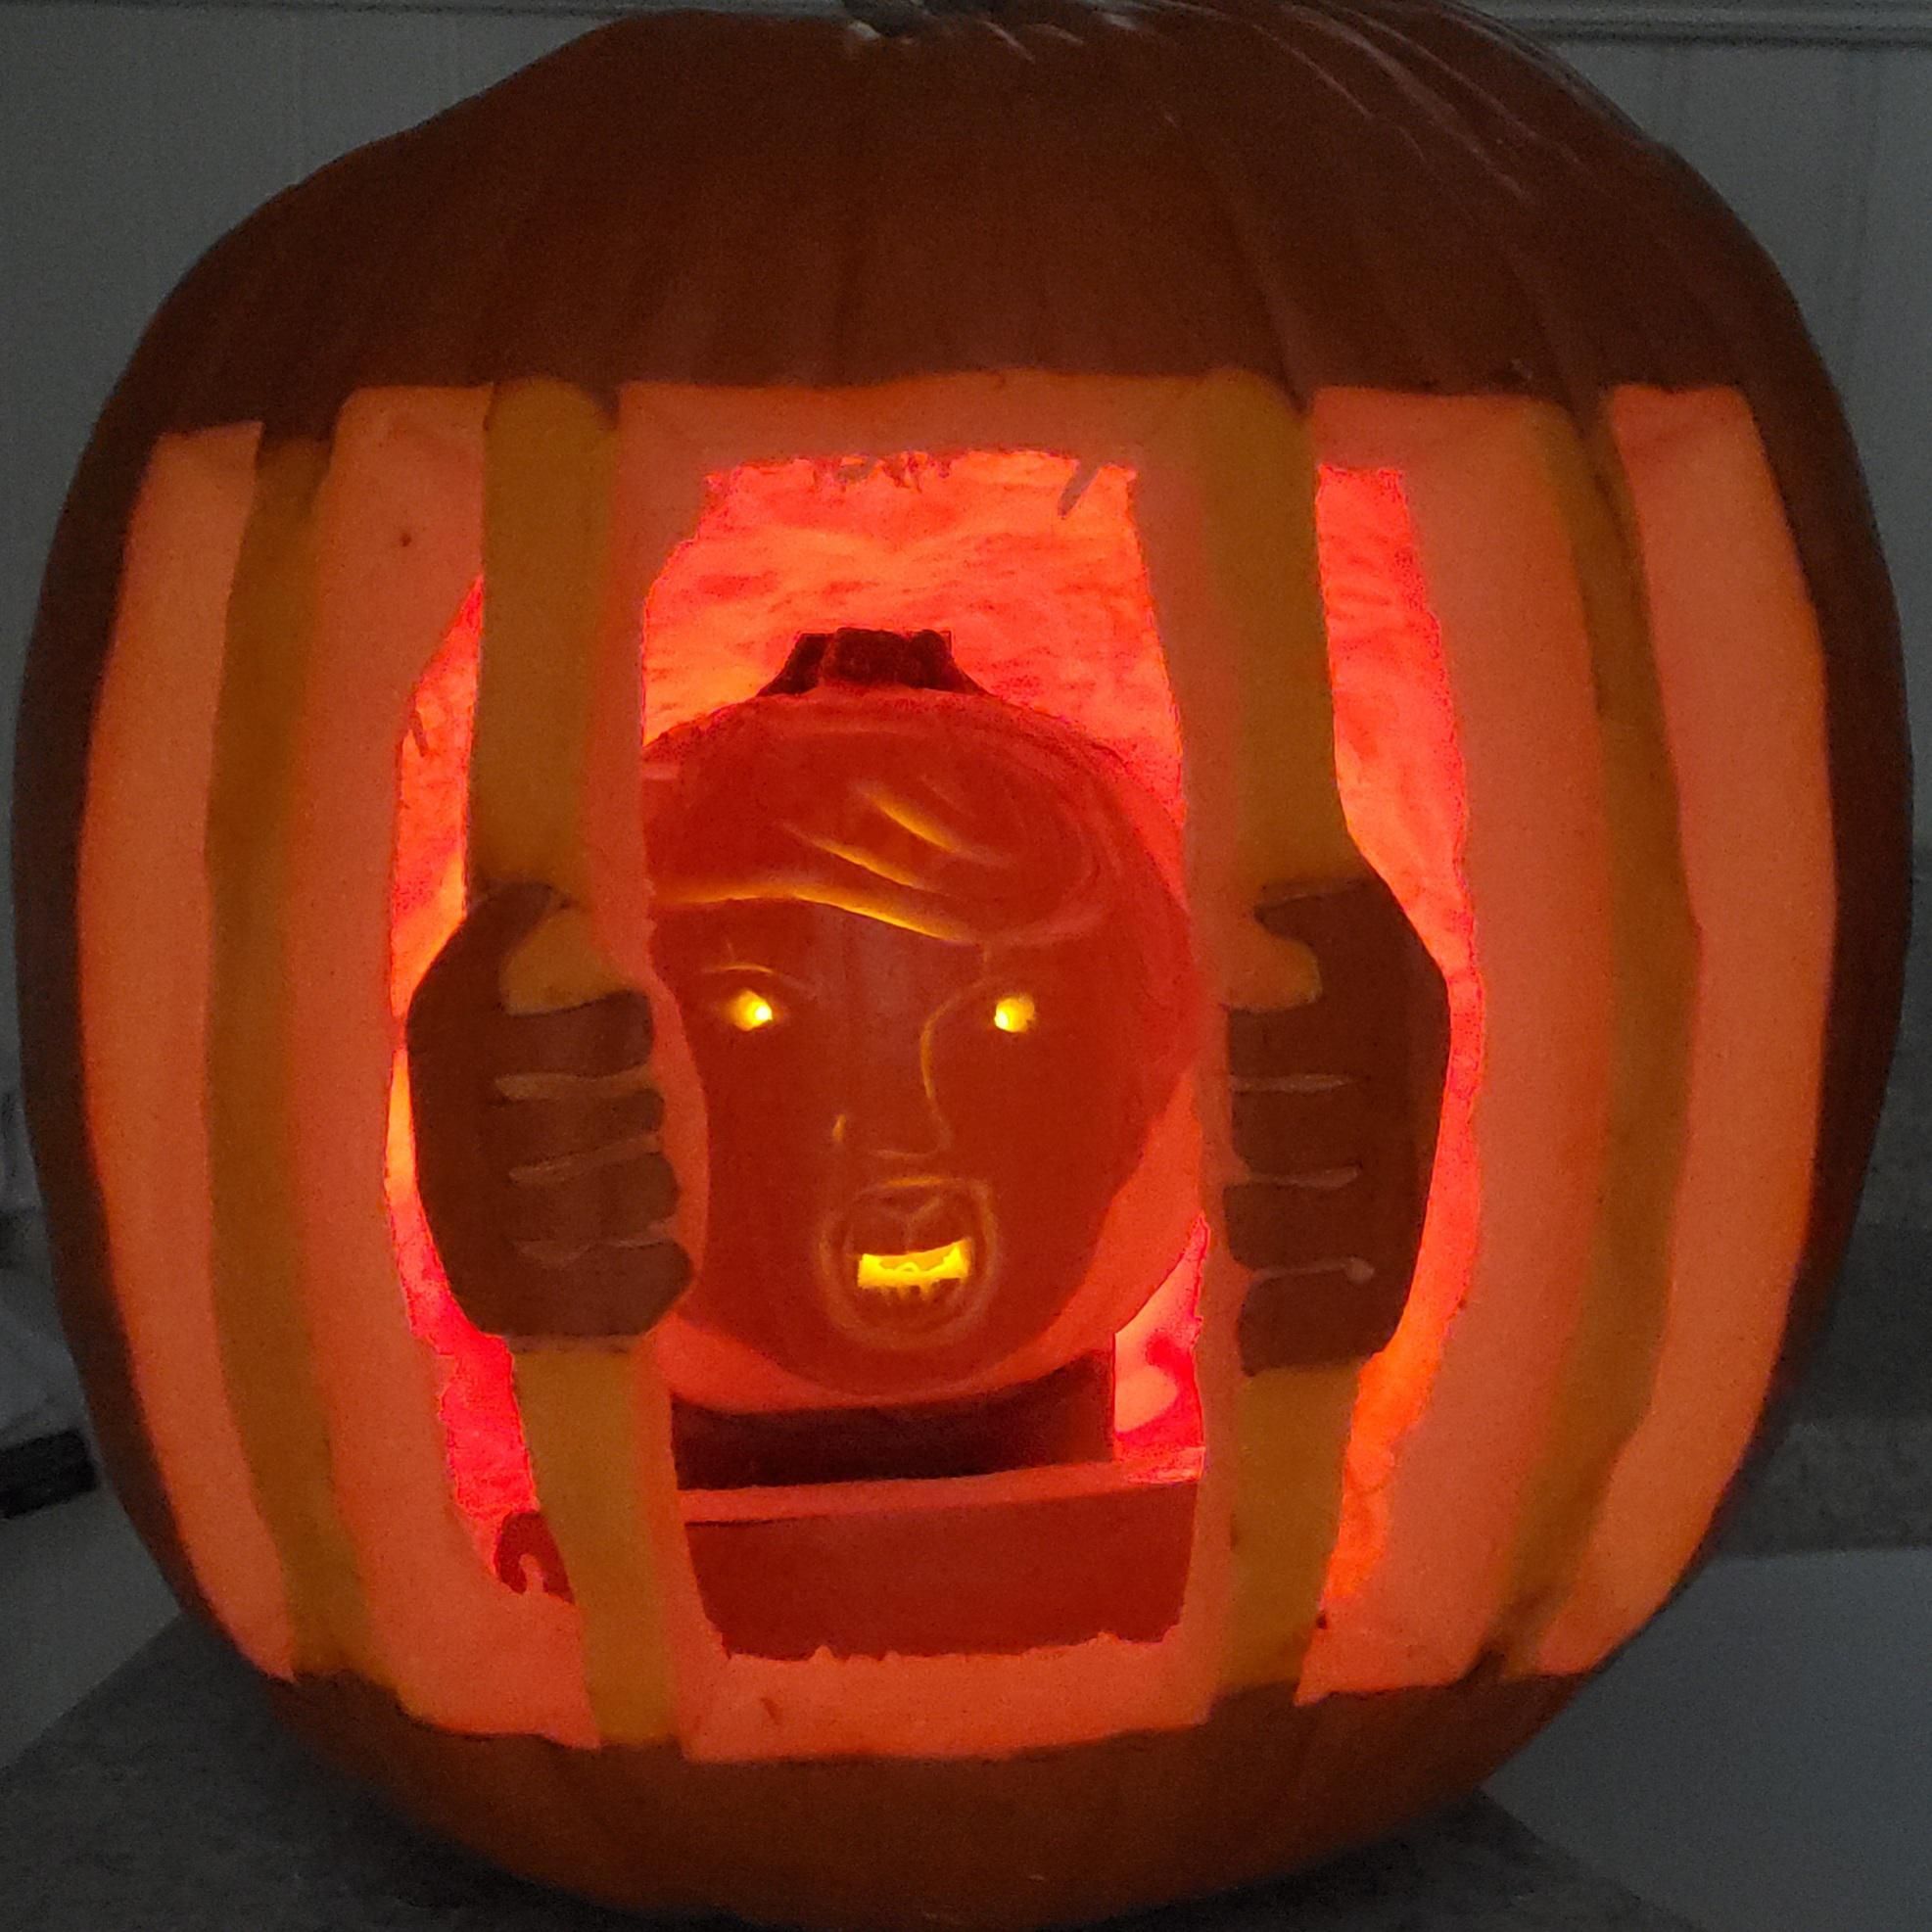 This carving of a guy in prison